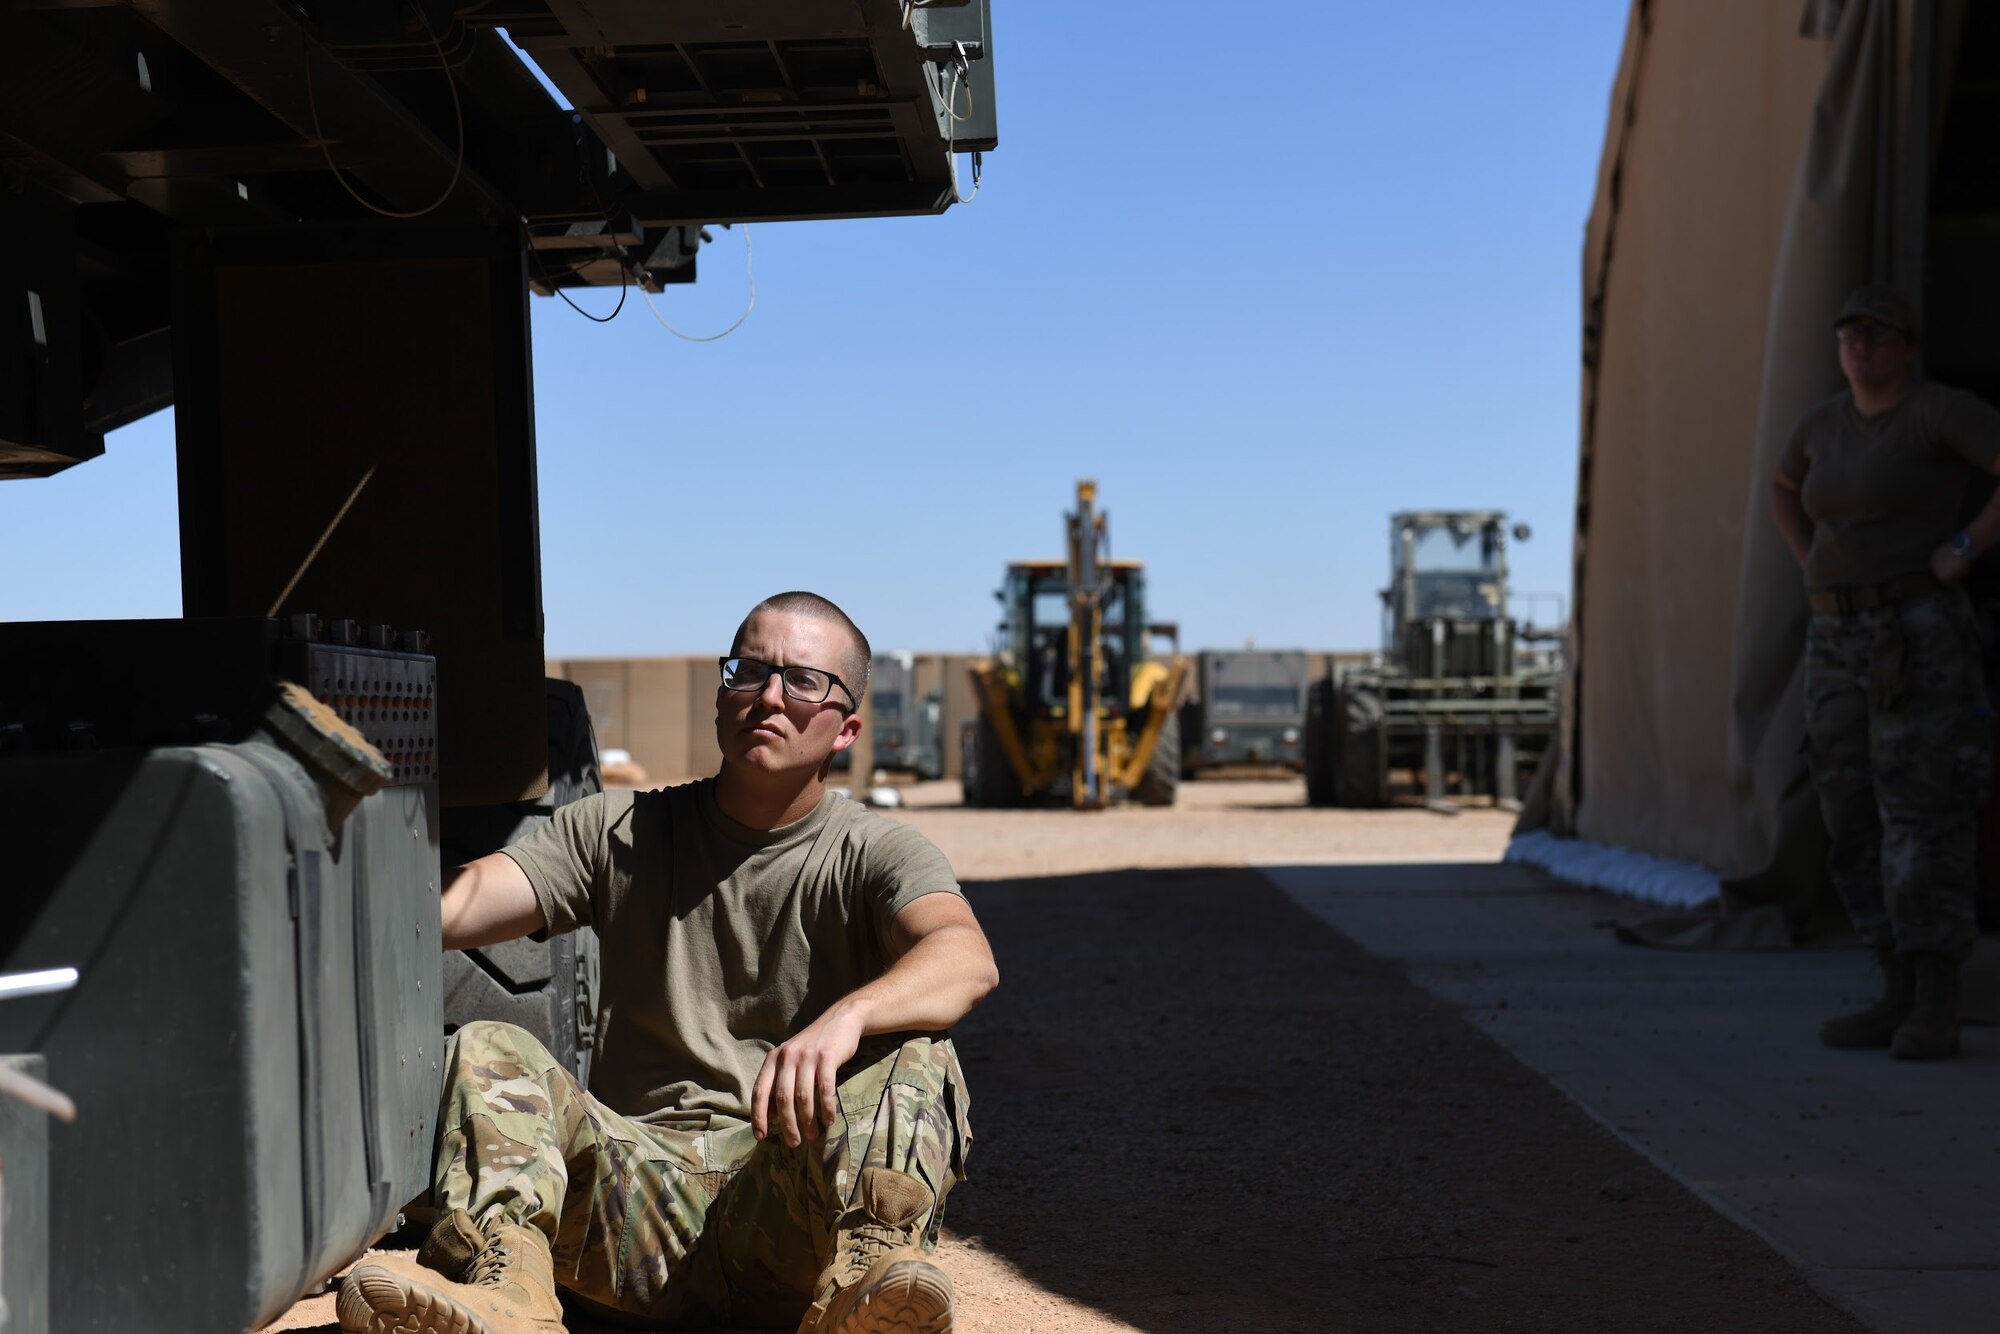 U.S. Air Force Senior Airman Ryan Davis, 724th Expeditionary Air Base Squadron air terminal operations center journeyman, tests a Halvorsen 25K-Loader to ensure that it is operational and ready for use, at Nigerien Air Base 201, Agadez, Niger, Jan 4, 2021. ATOC is responsible for the upload and download of cargo and passengers on all Air Mobility Command cargo aircraft. (U.S. Air Force photo by Senior Airman Gabrielle Winn)